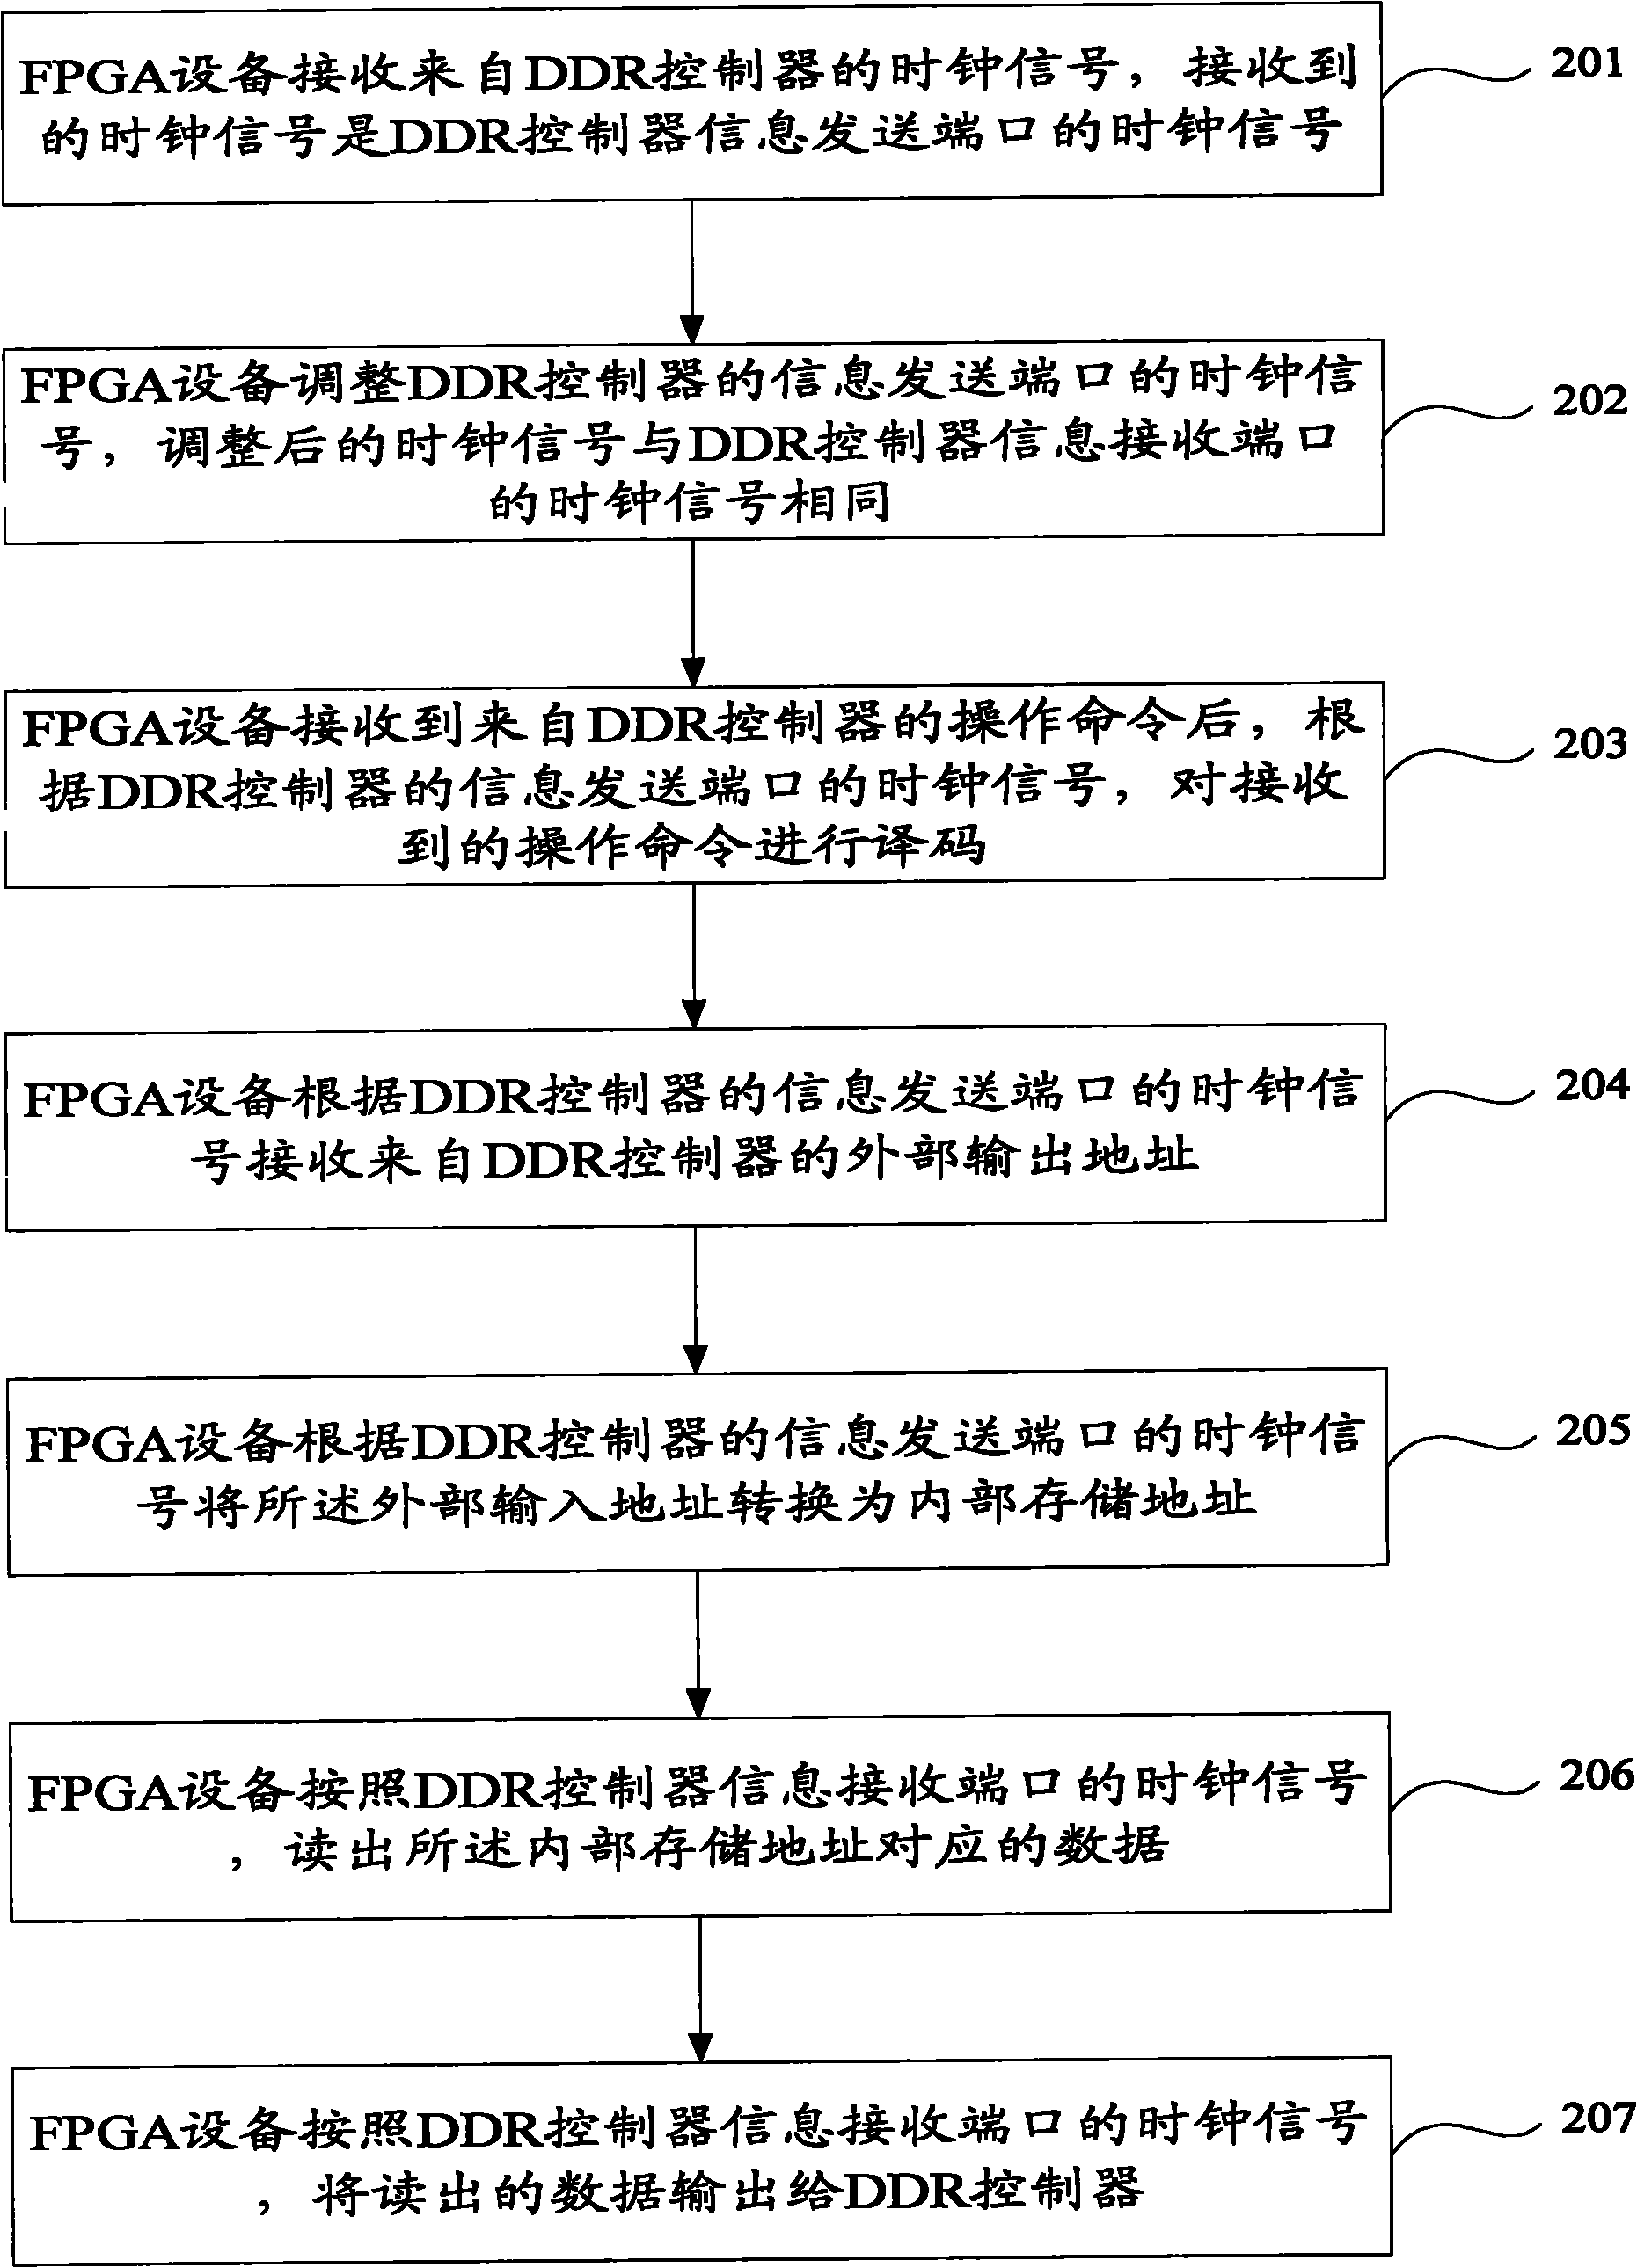 Reading and writing operation method and equipment of FPGA (Field Programmable Gate Array) equipment in DDR (Double Data Rate) interface